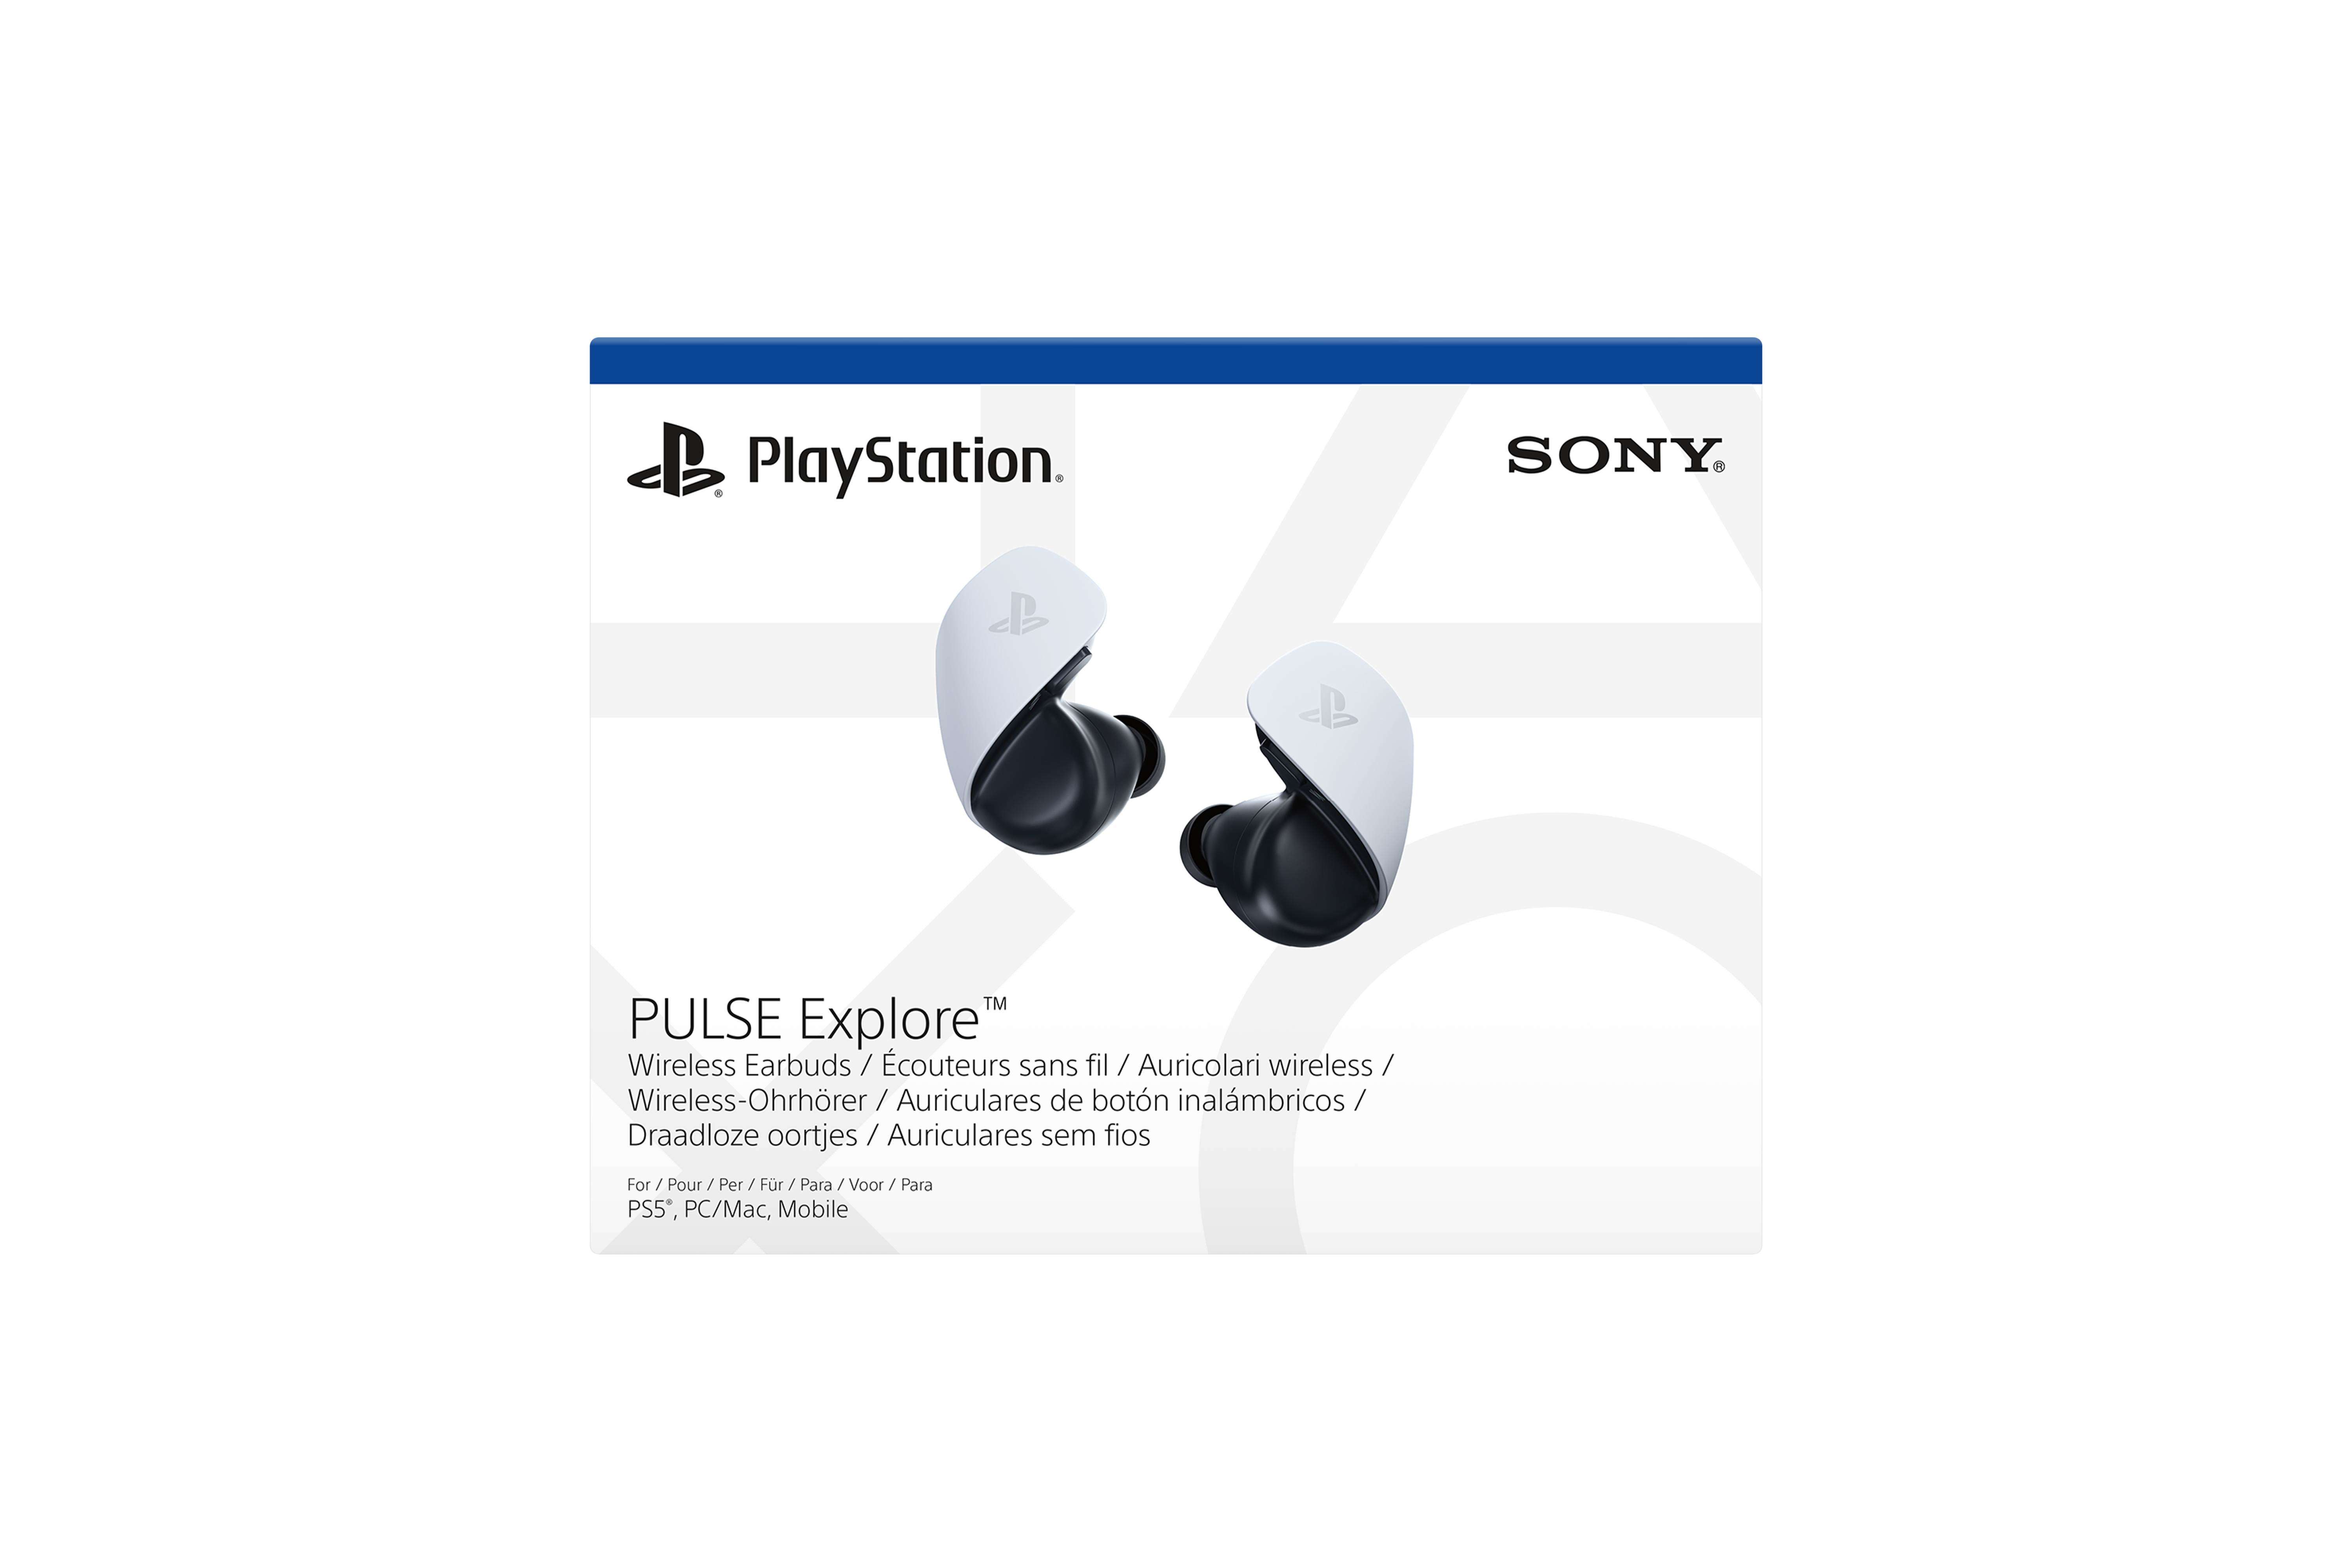 Sony Playstation 5 PULSE Explore- Wireless Earbuds